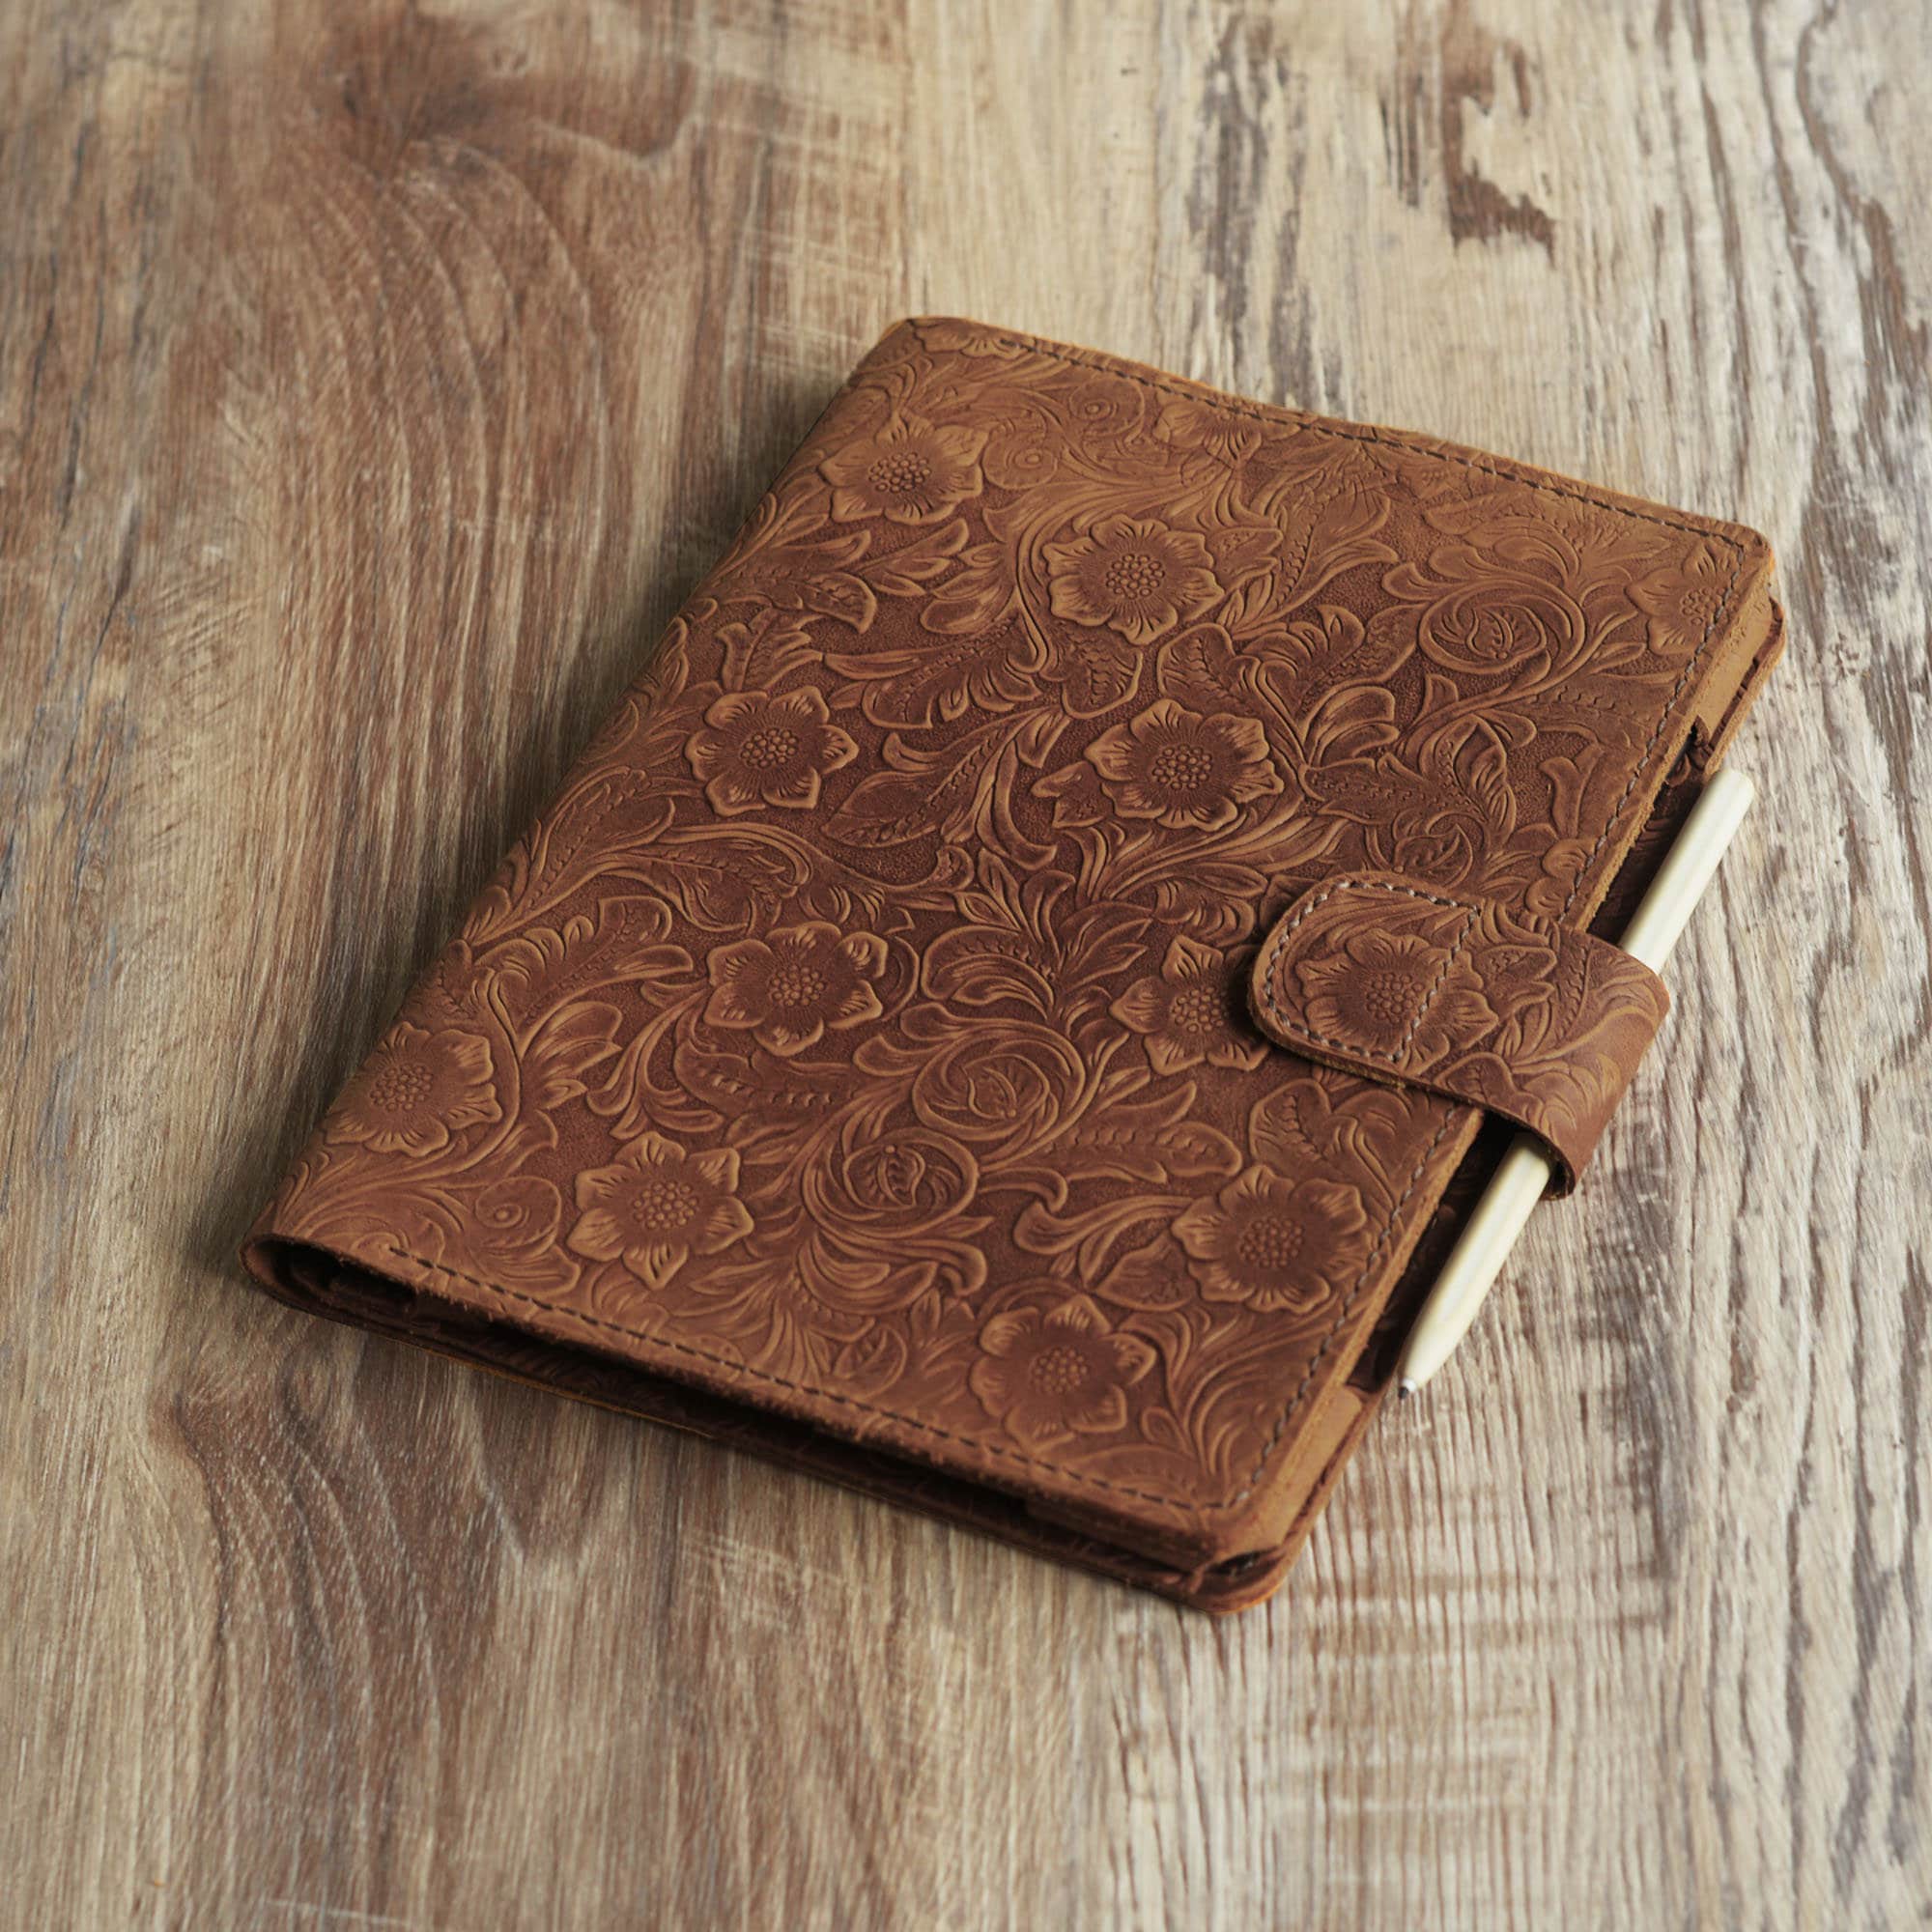 handmade-leather-remarkable-2-folio-with-pen-holder-tooled-leather-k07-gmremarkable